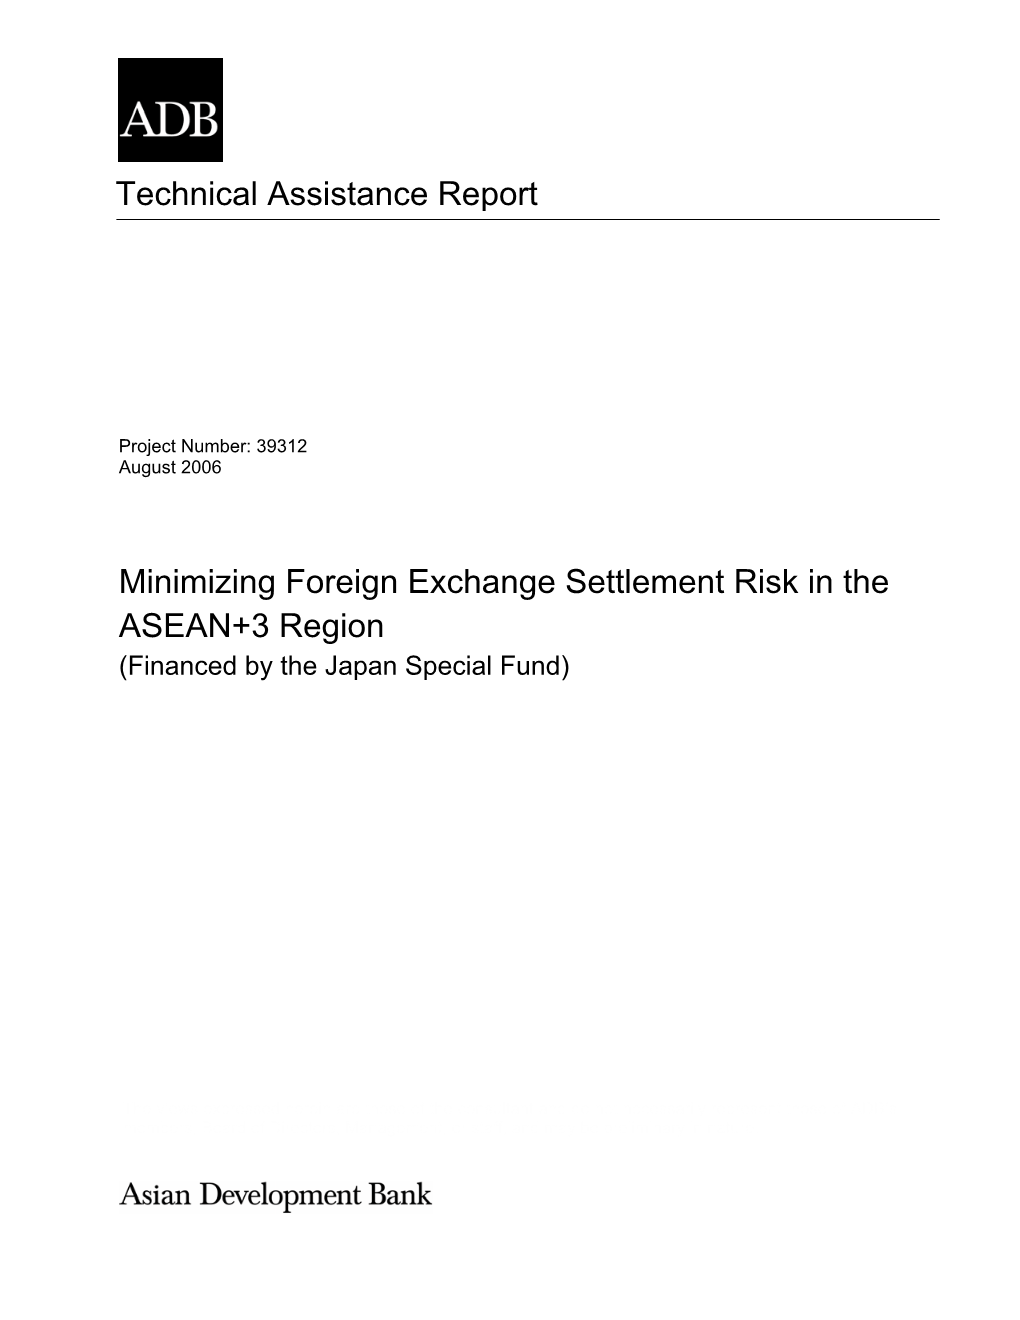 Minimizing Foreign Exchange Settlement Risk in the ASEAN+3 Region (Financed by the Japan Special Fund)